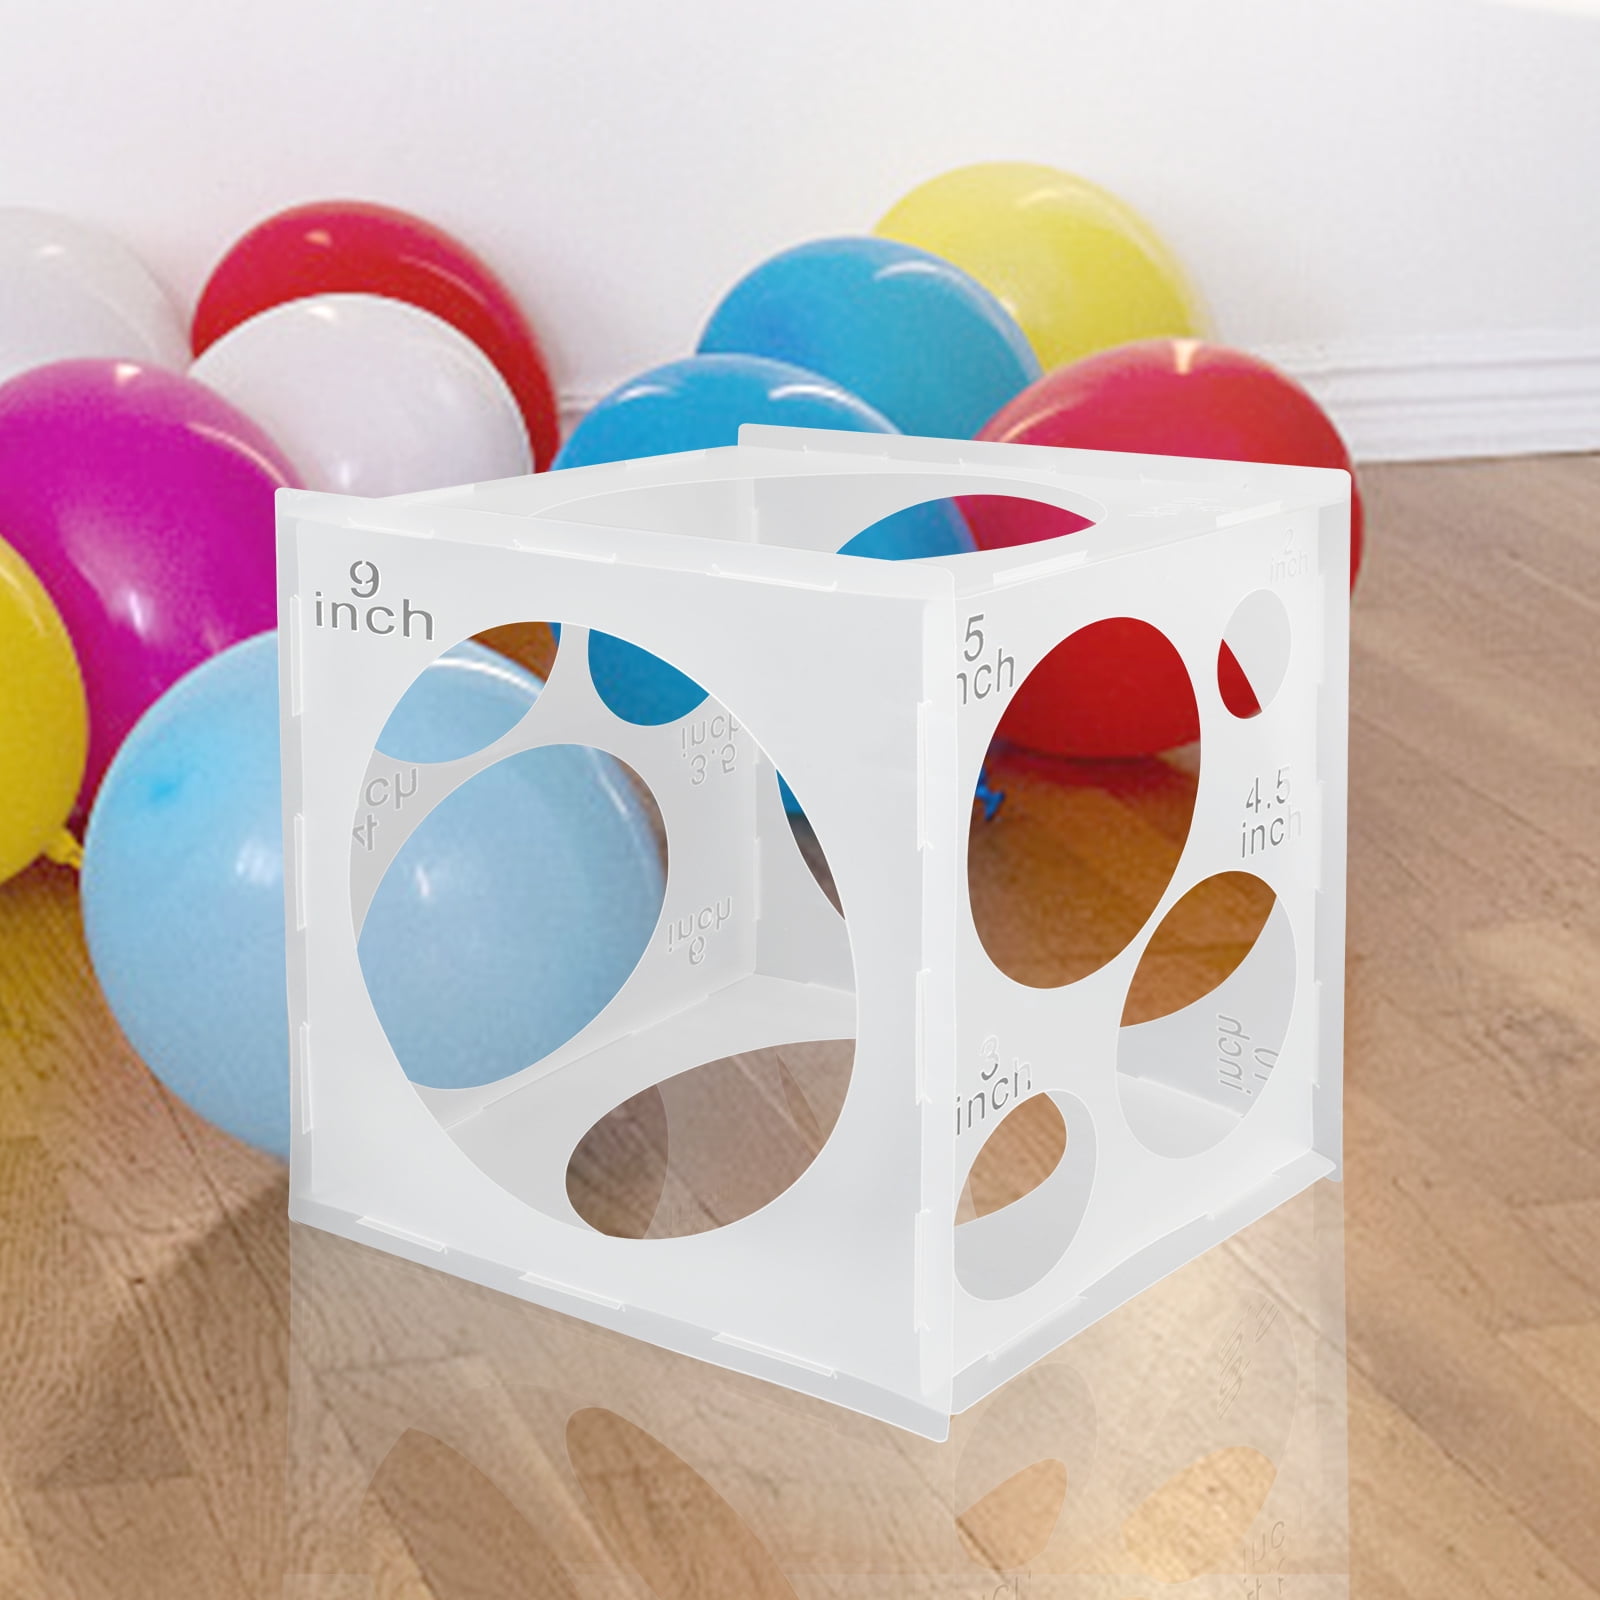 11 Holes Collapsible Balloon Sizer Box, TSV Plastic Balloon Sizer Cube Box,  2-10 Inch Different Hole Size Measurement Tool for Party Birthday Wedding  Balloon Decorations Creating Balloon Arch Columns 